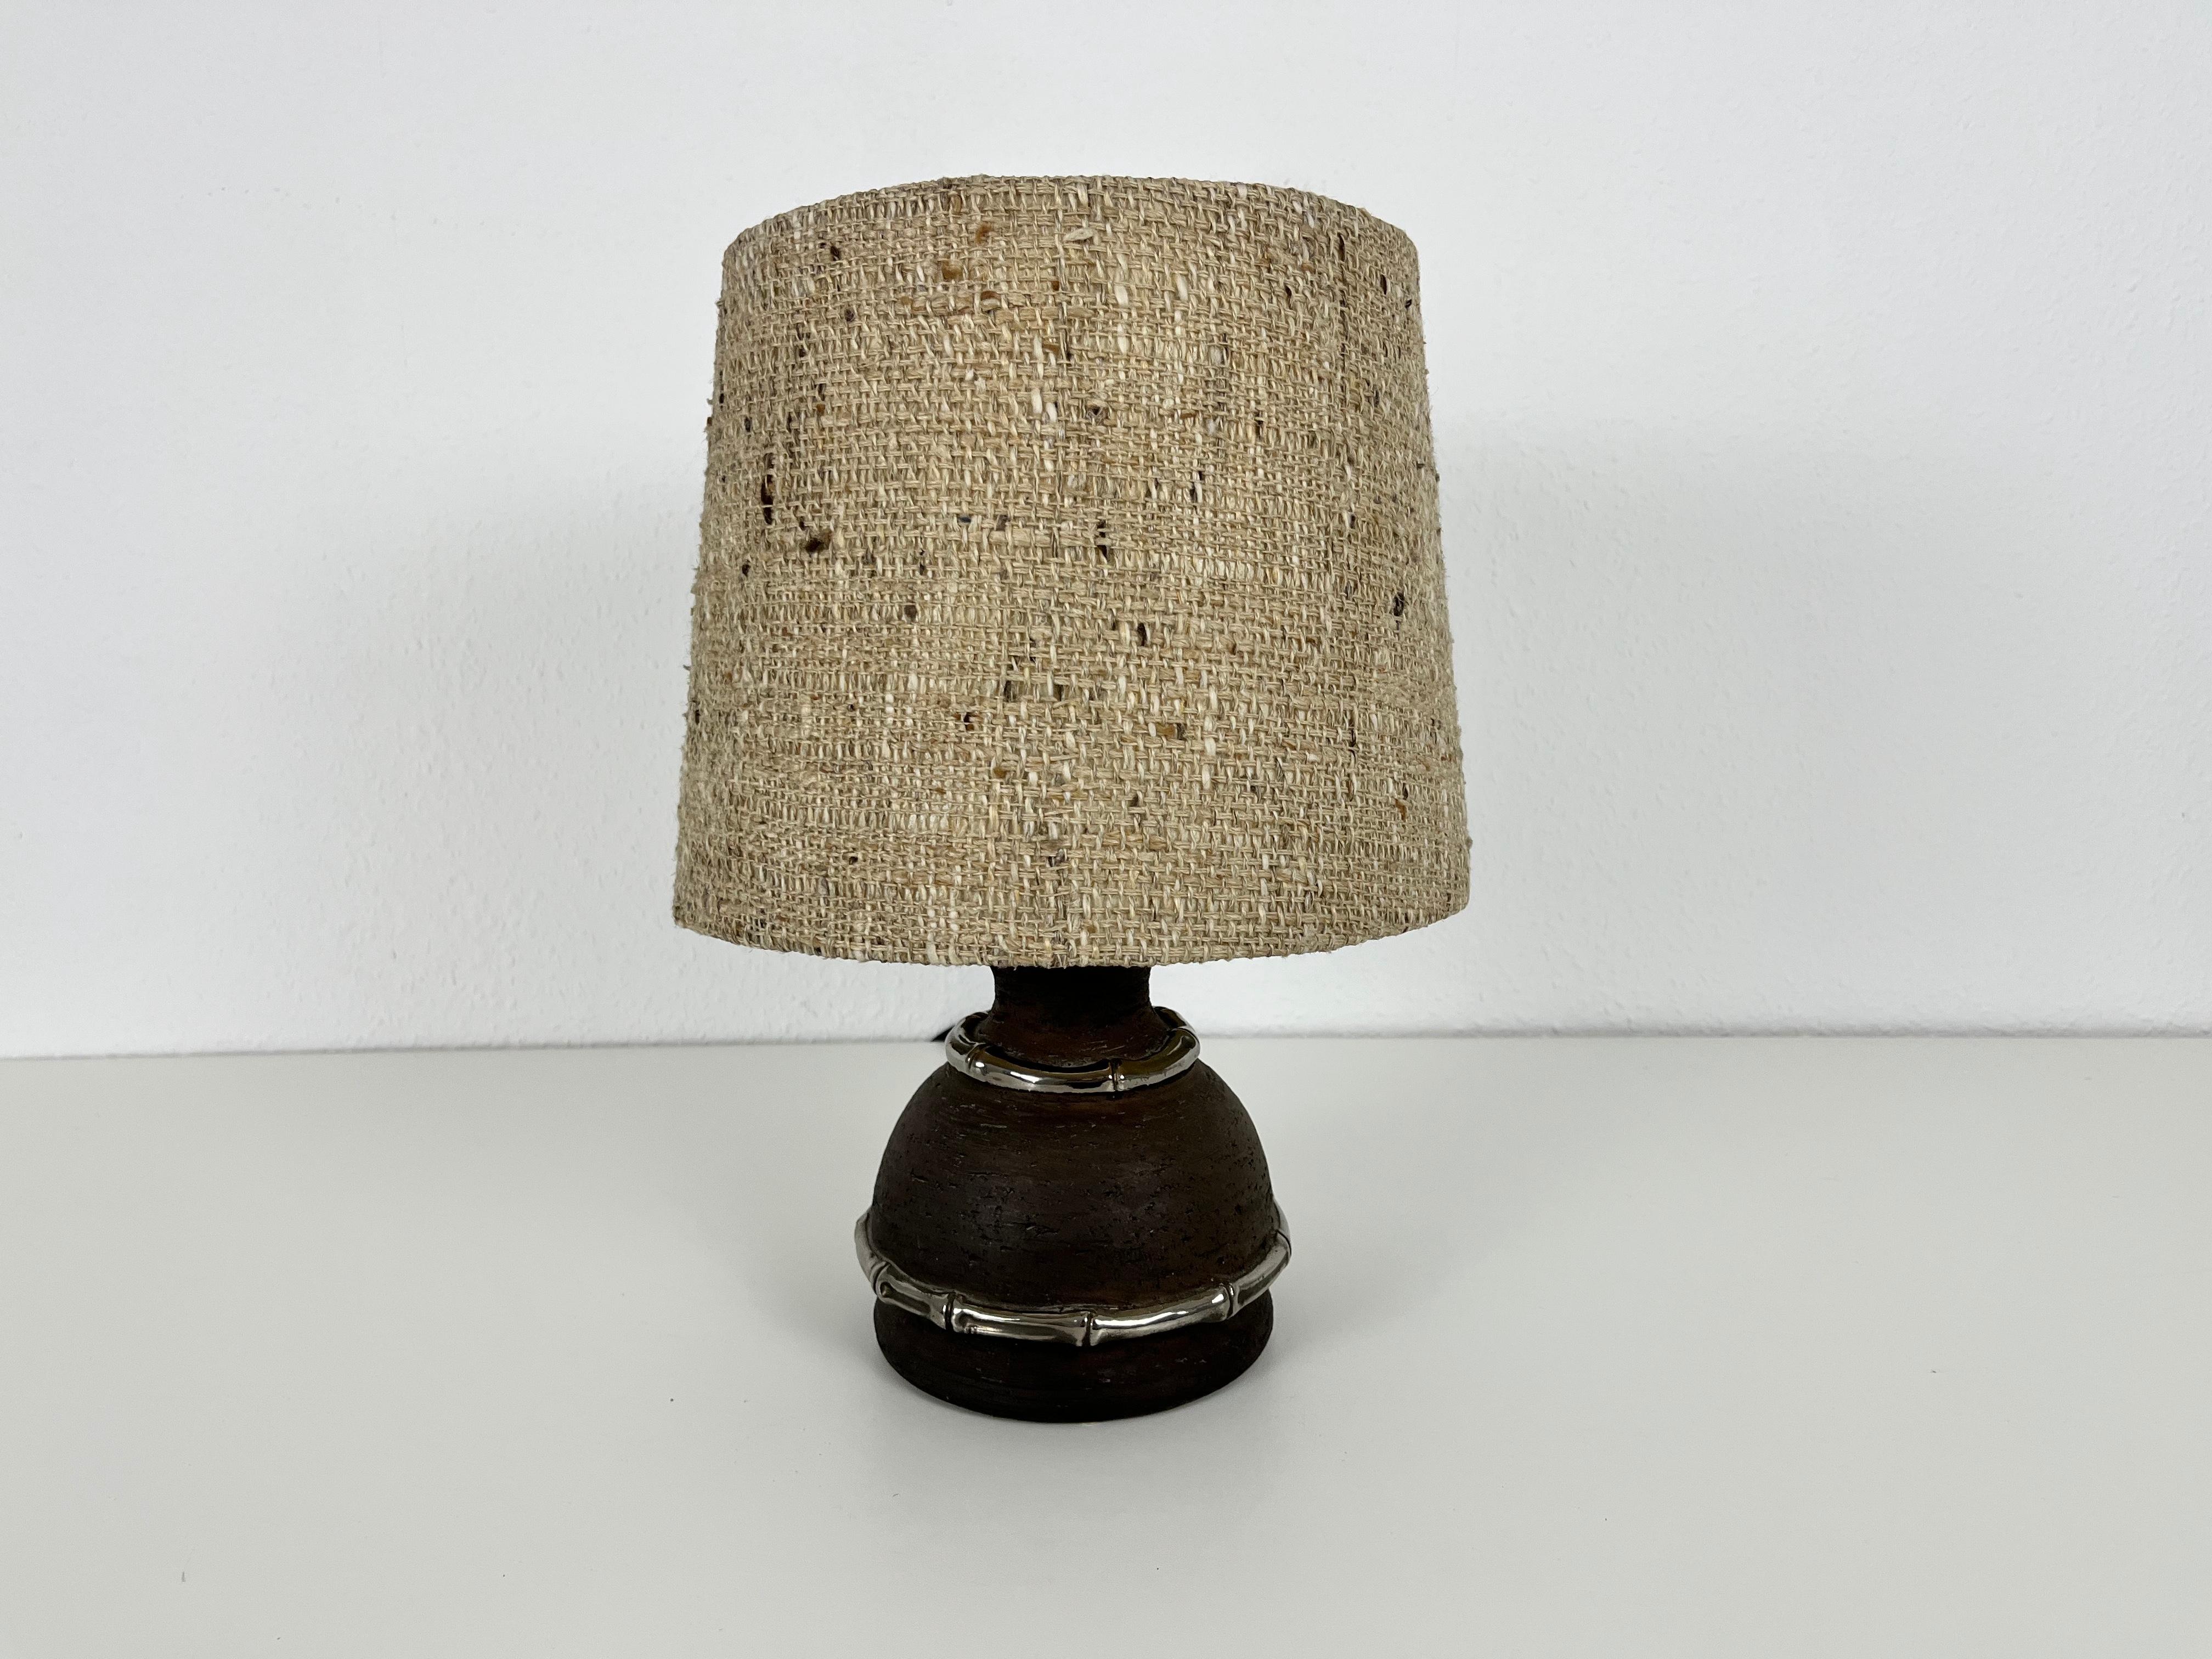 A beautiful large table lamp made in the 1960s. The base is made of brown ceramic. The lamp shade has a beige color. The table lamp has an beautiful Italian design.

The light requires one E27 light bulb. Good vintage condition with a small crack